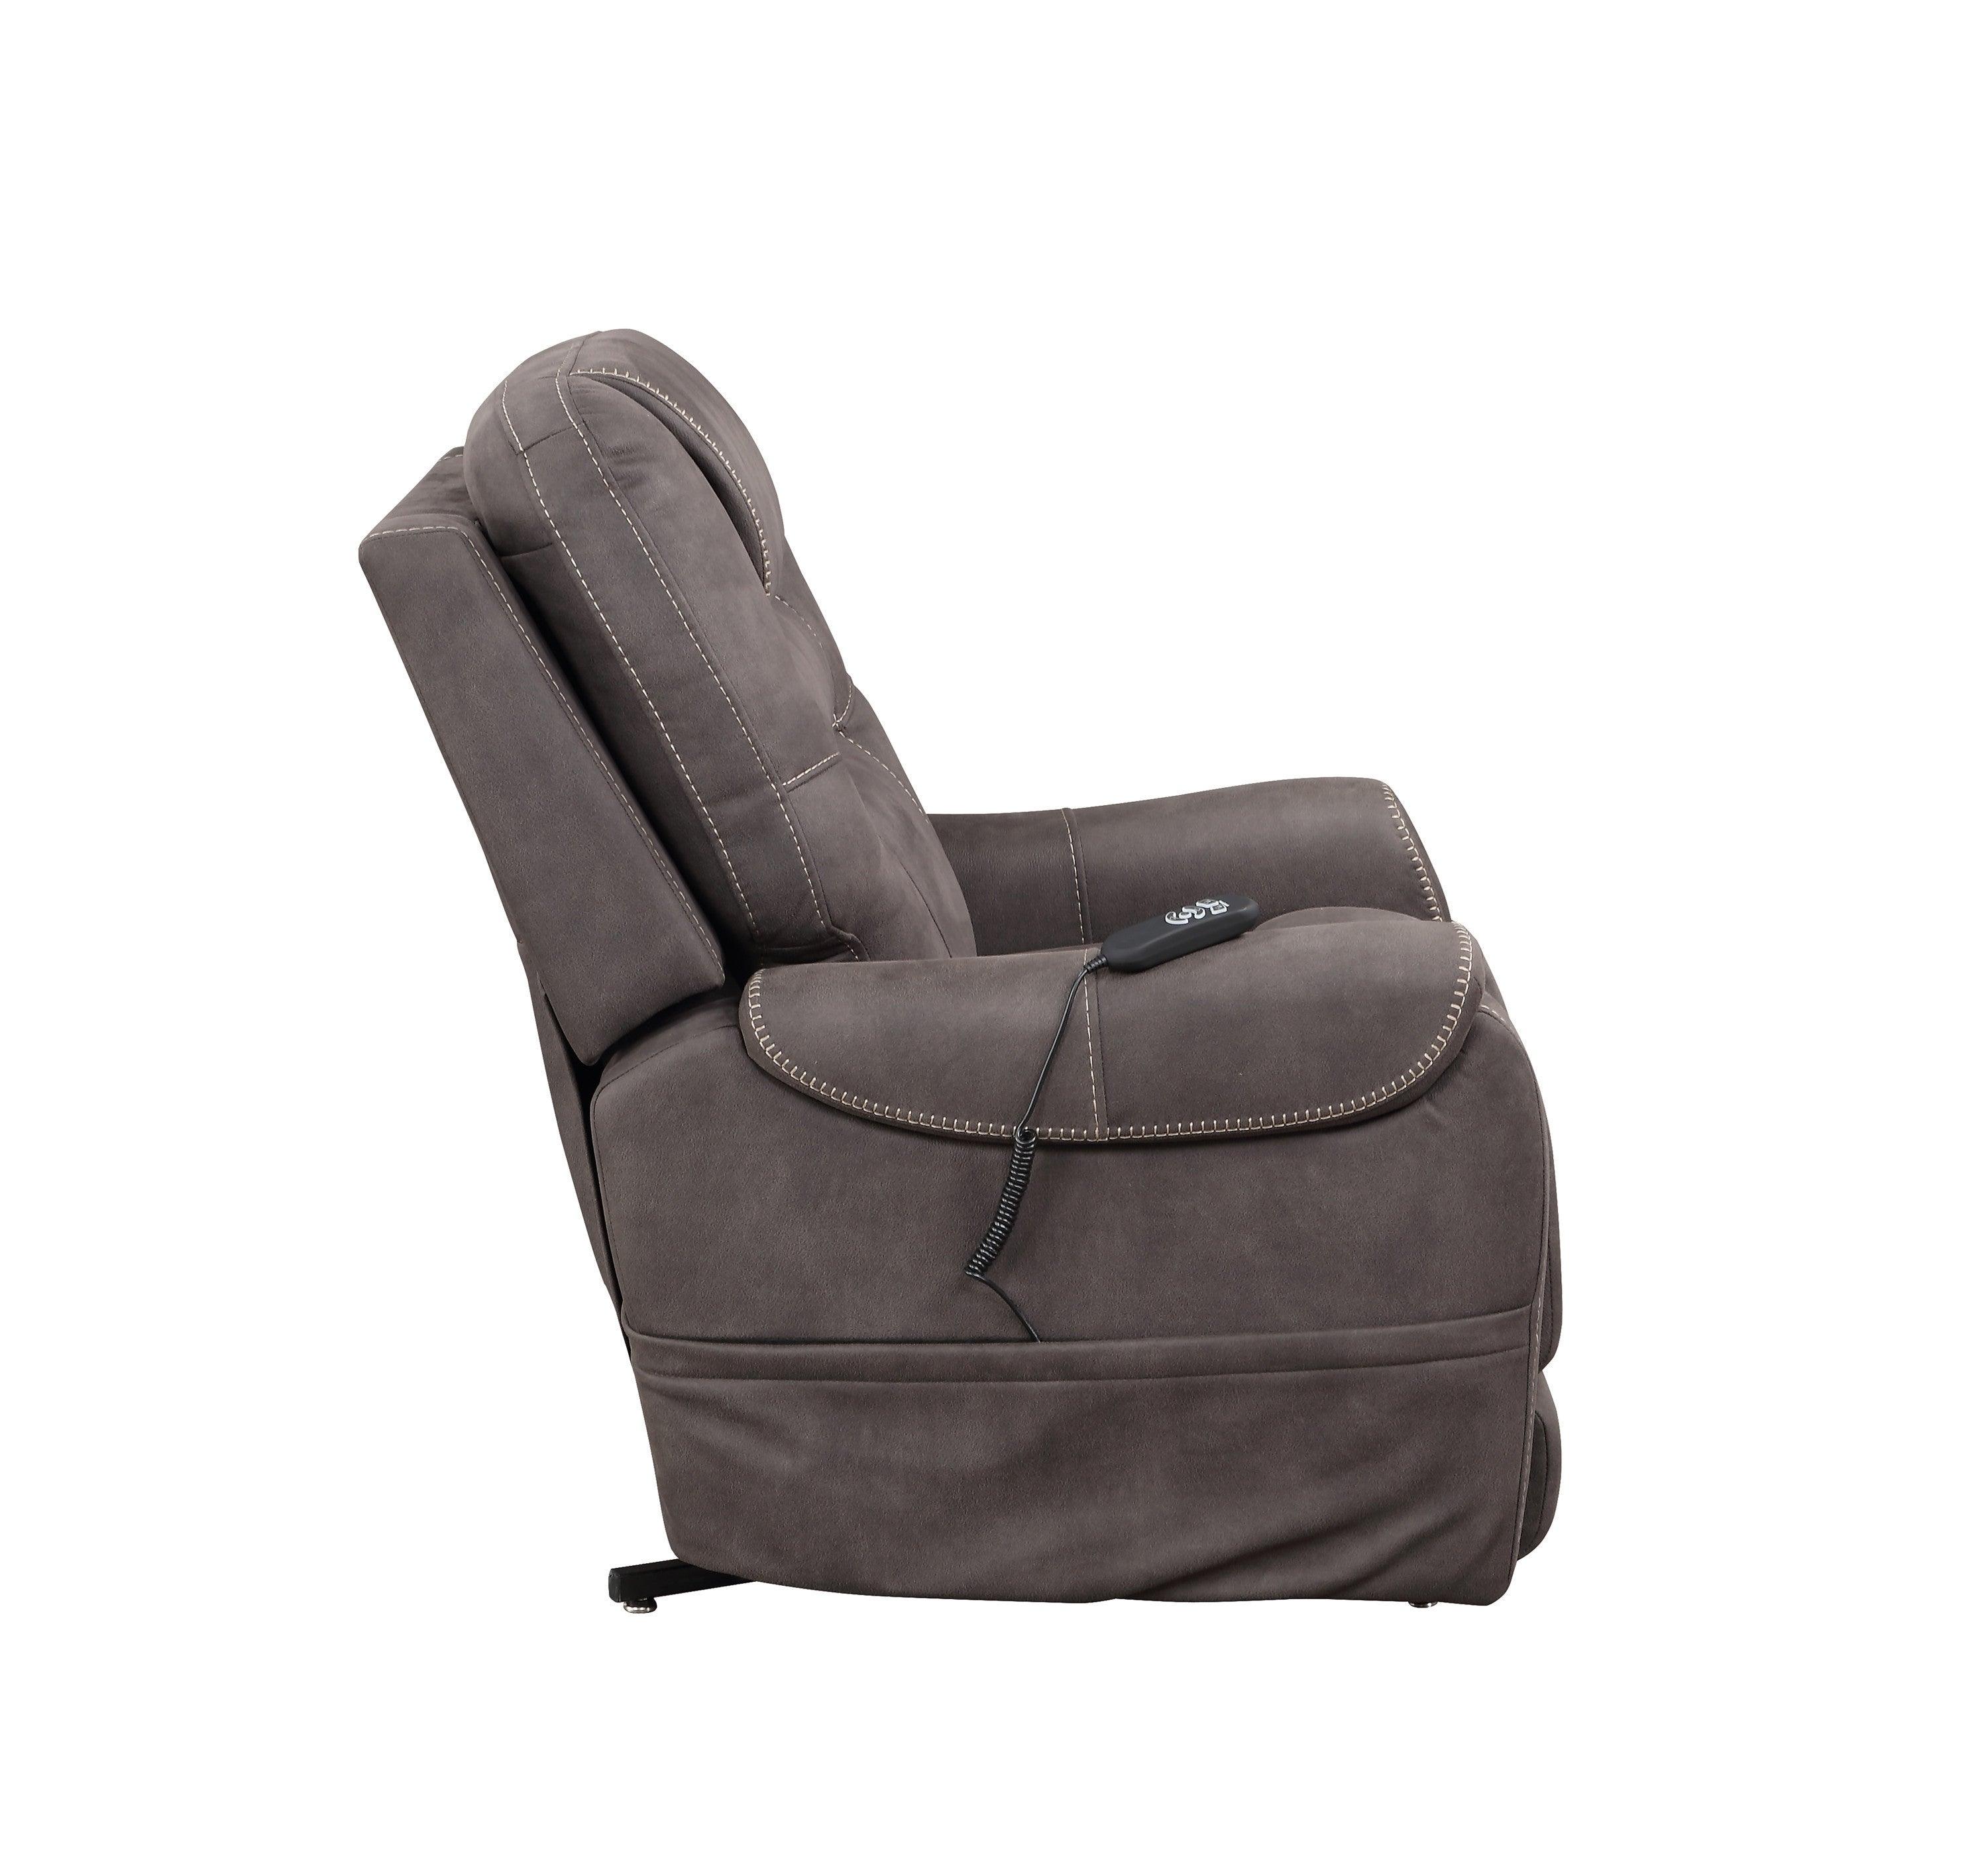 Brisbane Power Lift Chair with 3-Zone Heating and Adjustable Headrest